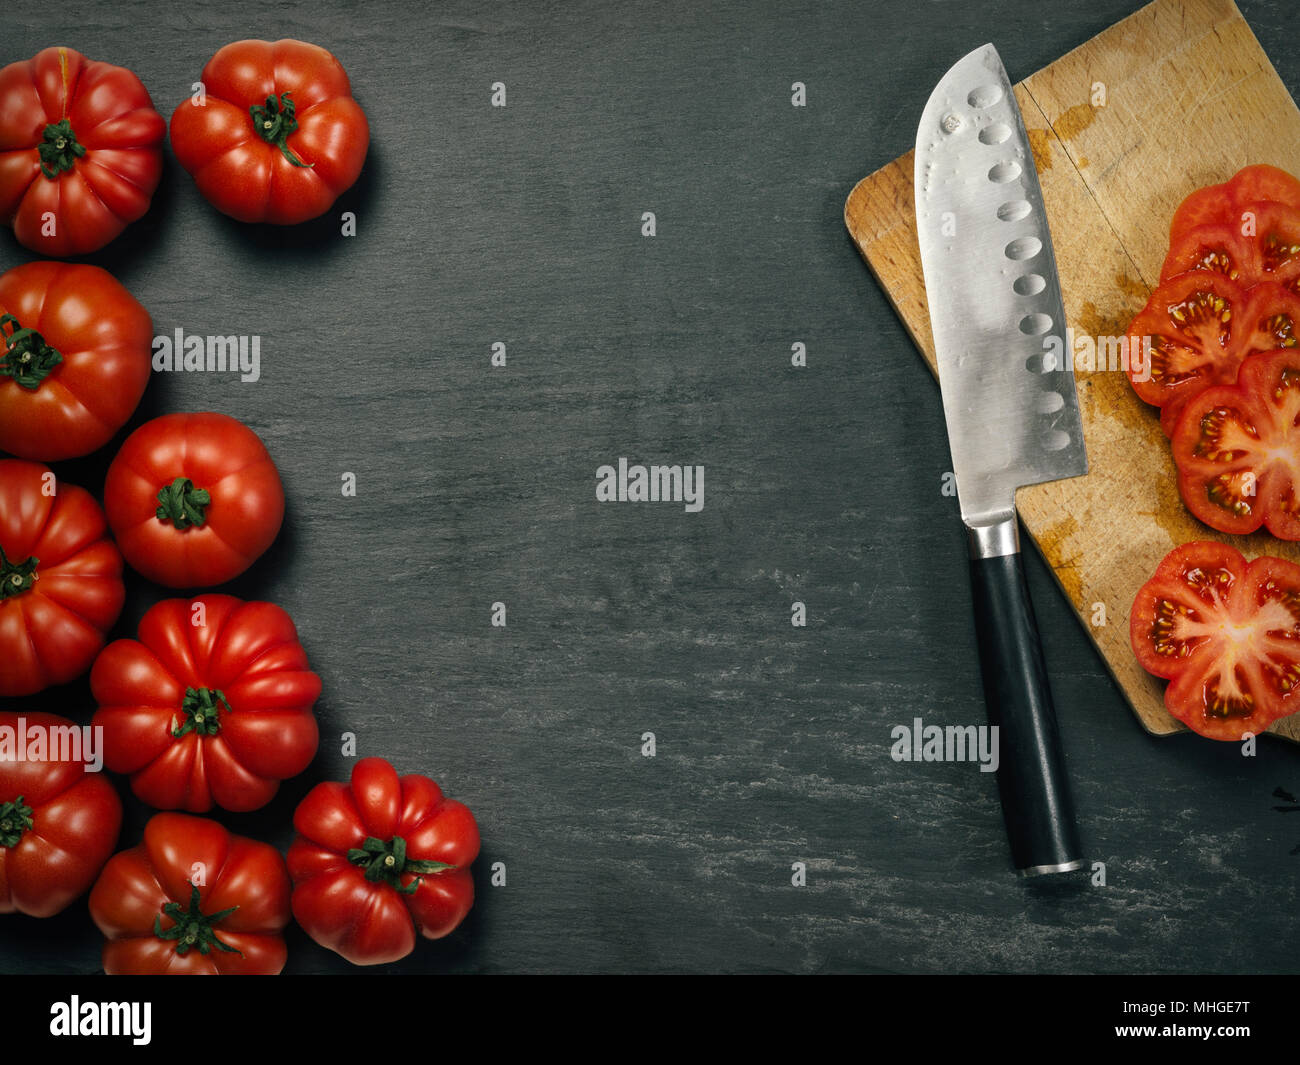 Photo of a table top with Marmande tomatoes, a knife, and slices on a cutting board. Stock Photo